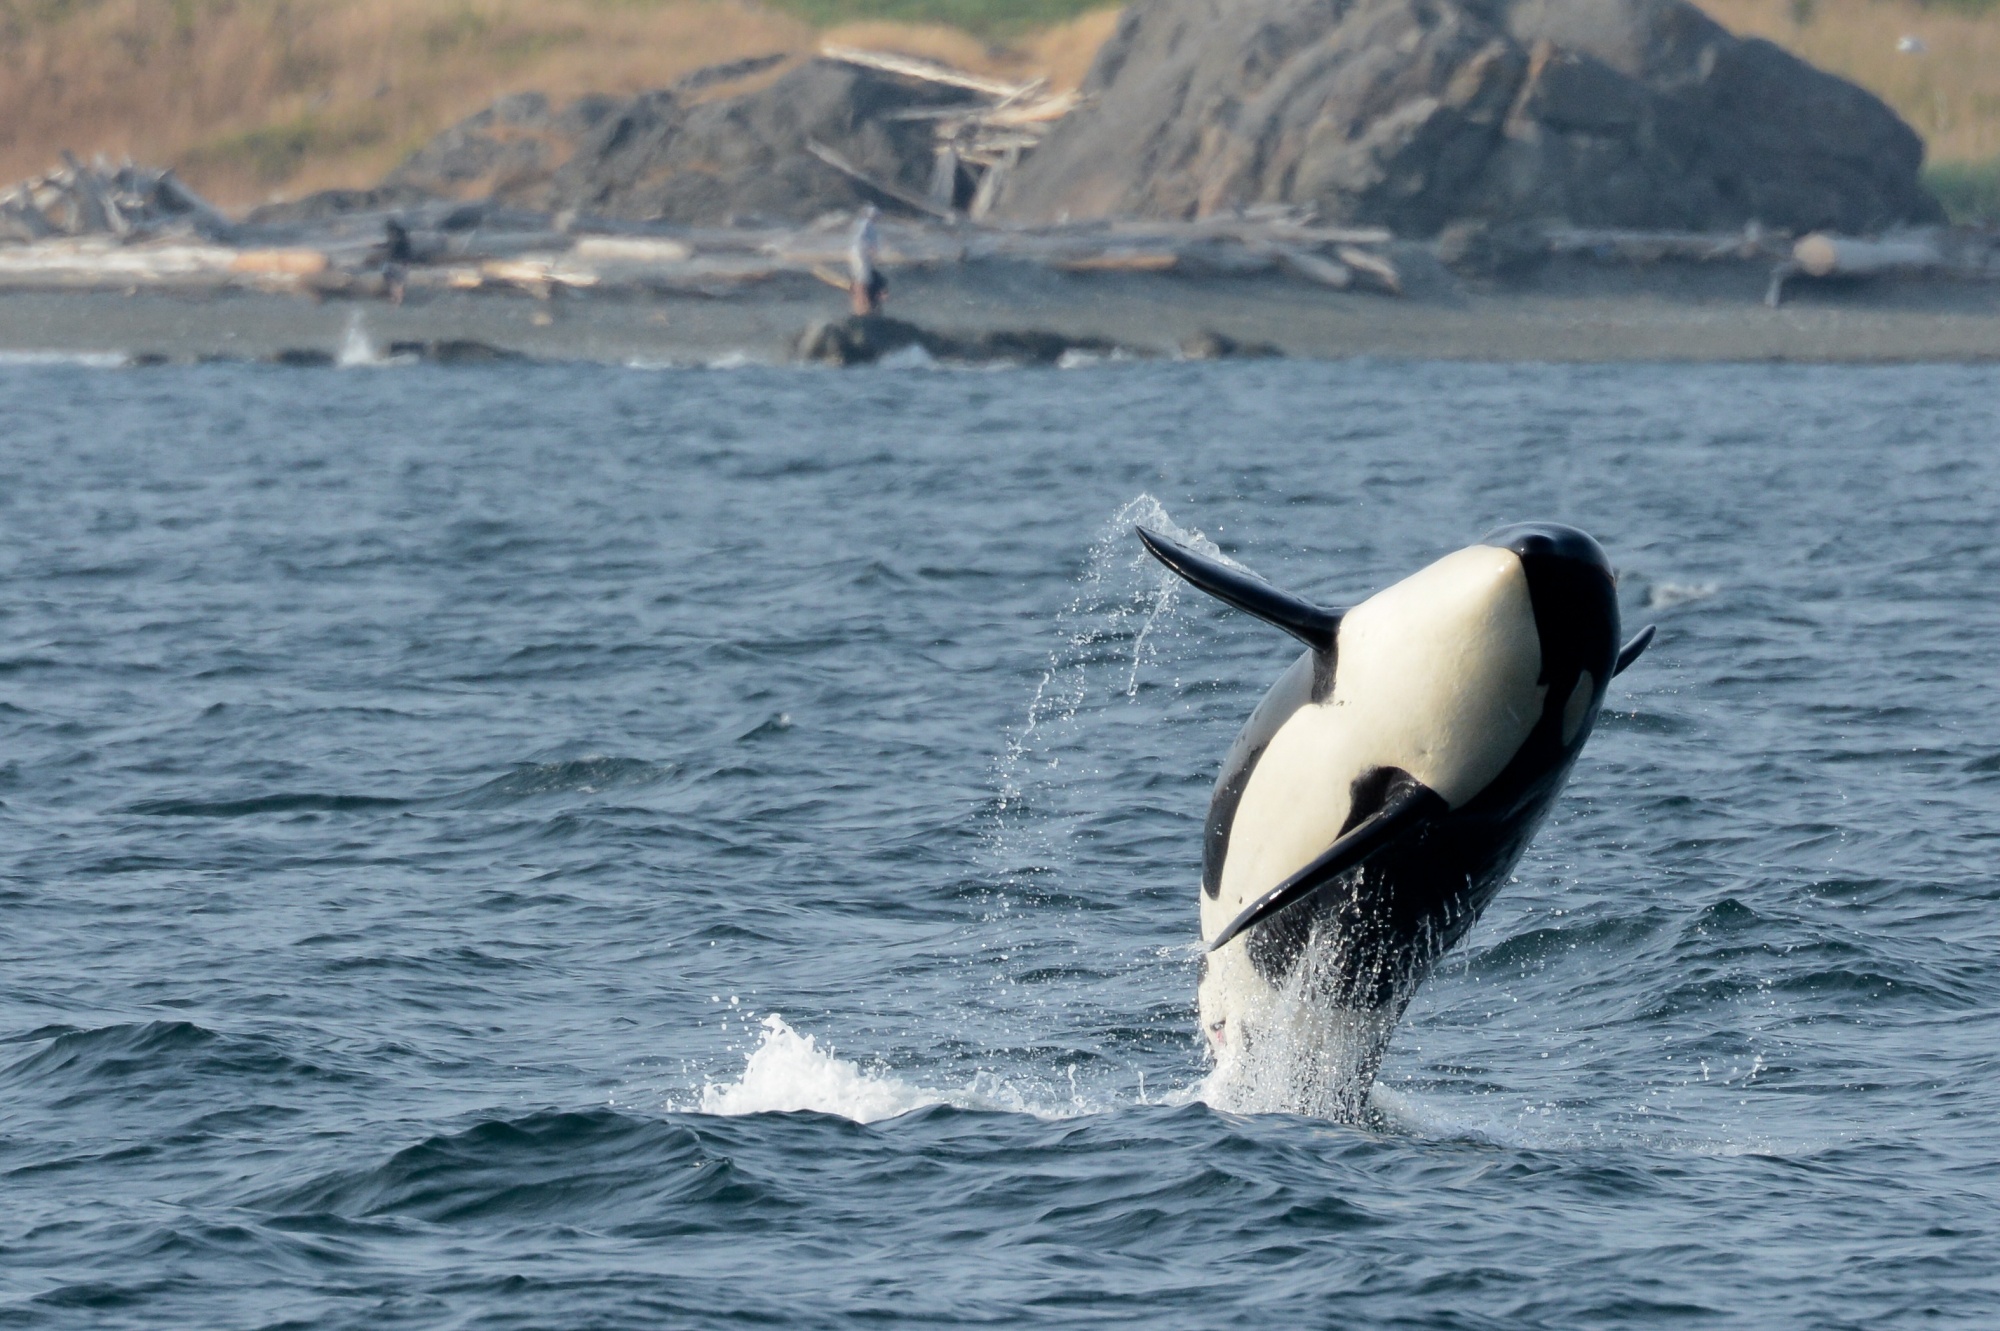 Best remote destinations, orca whale jumping out of the ocean in the San Juan Islands Washington near Victoria Canada